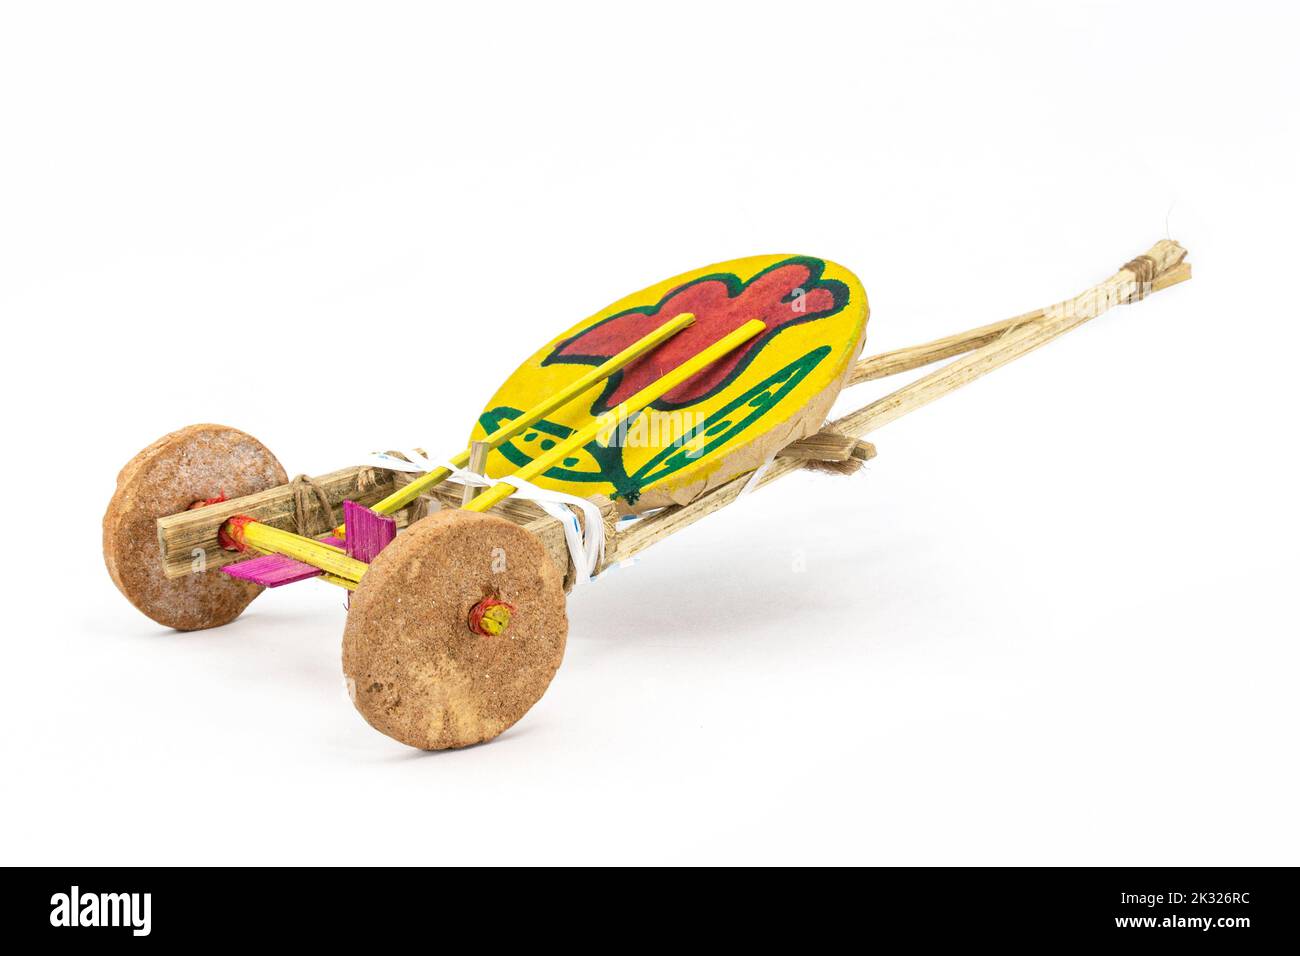 Tomtom gari. traditional handmade new year carnival wagon toy of Boishakhi mela in Bangladesh. made of clay wheel drum and bamboo stick tighten with s Stock Photo